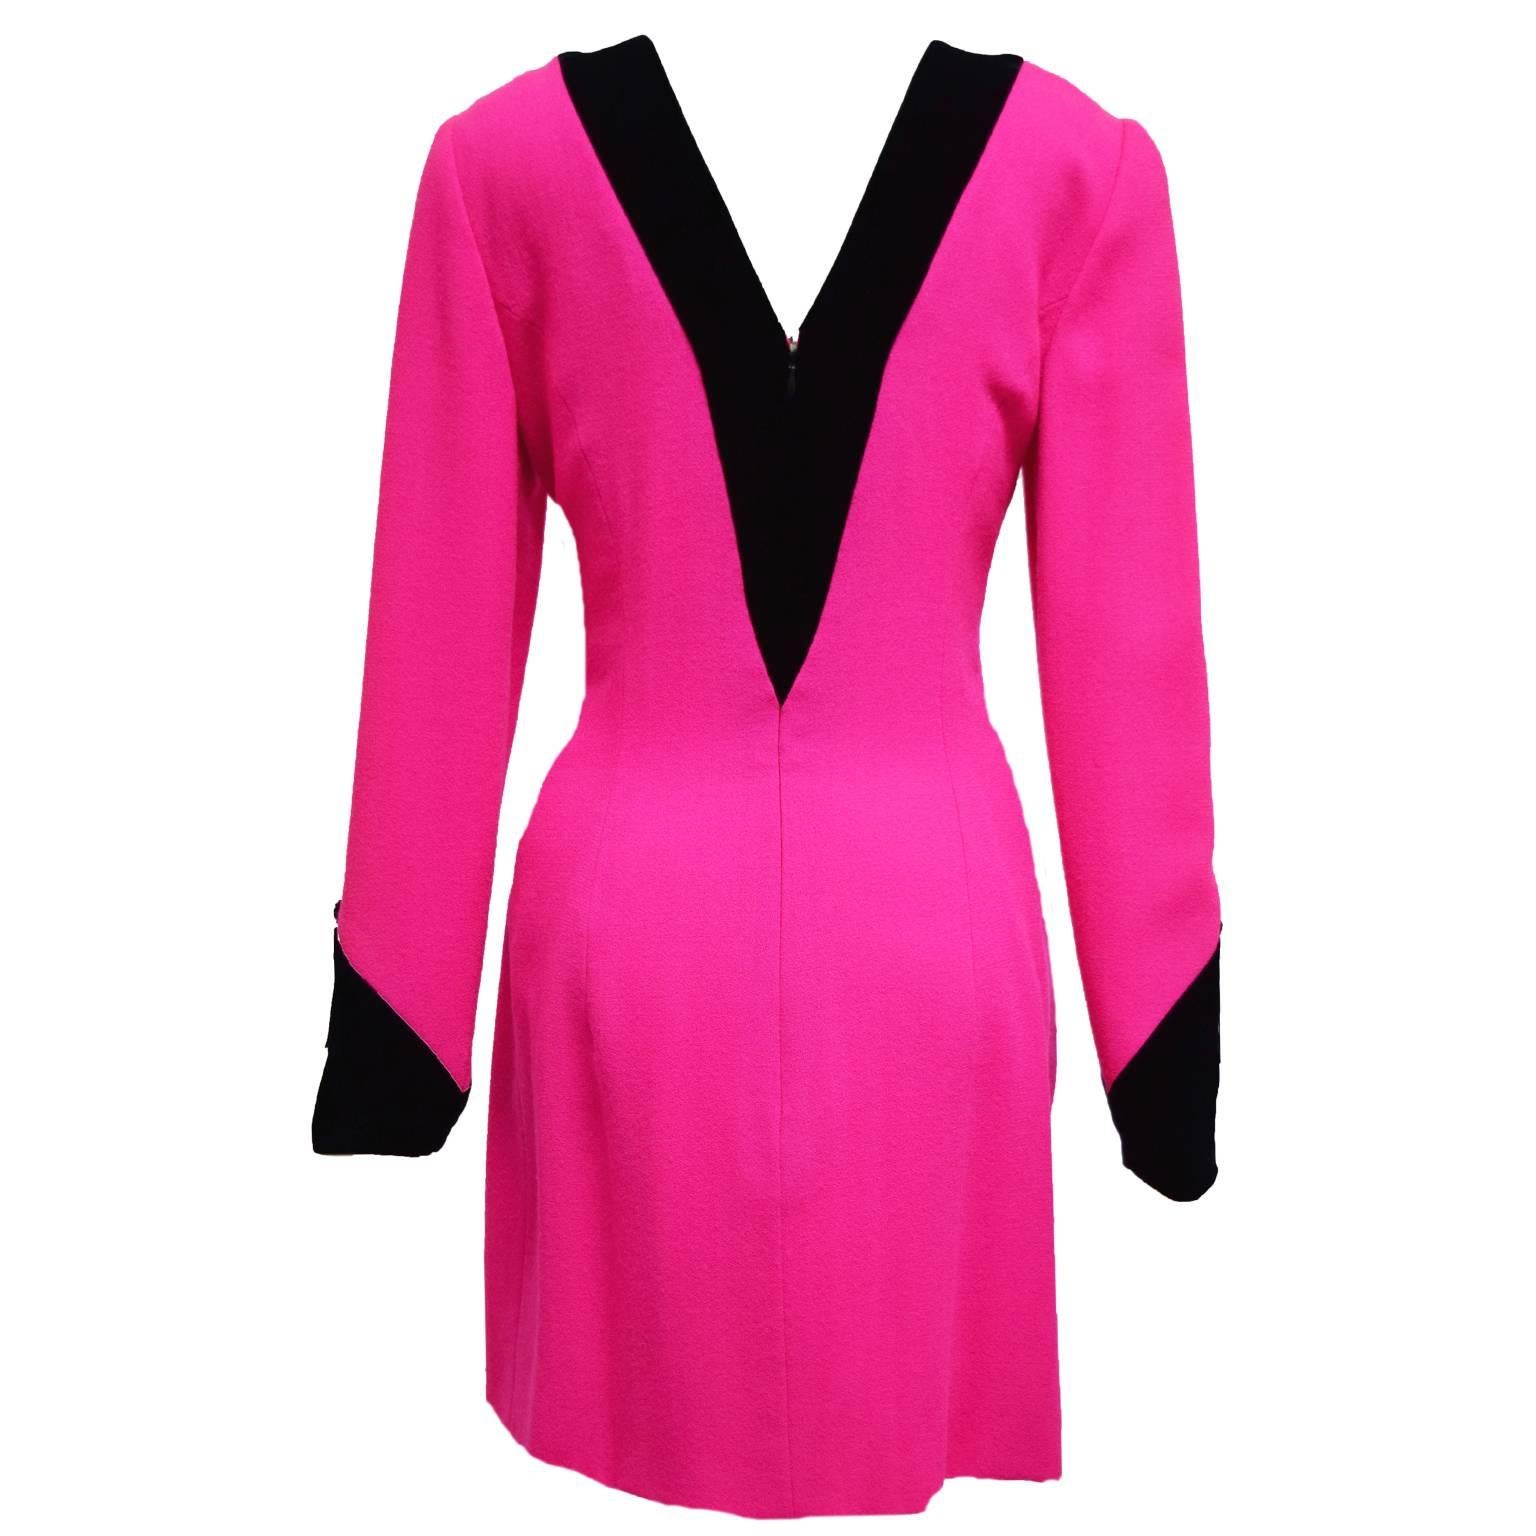 This one of a kind Carolina Herrera is one of her beautiful vintage pieces dated back in the 1980's. This dress can be worn as a cocktail dress, not only that, but it is a unique timeless dress. It is black and neon fuchsia with a deep V back and